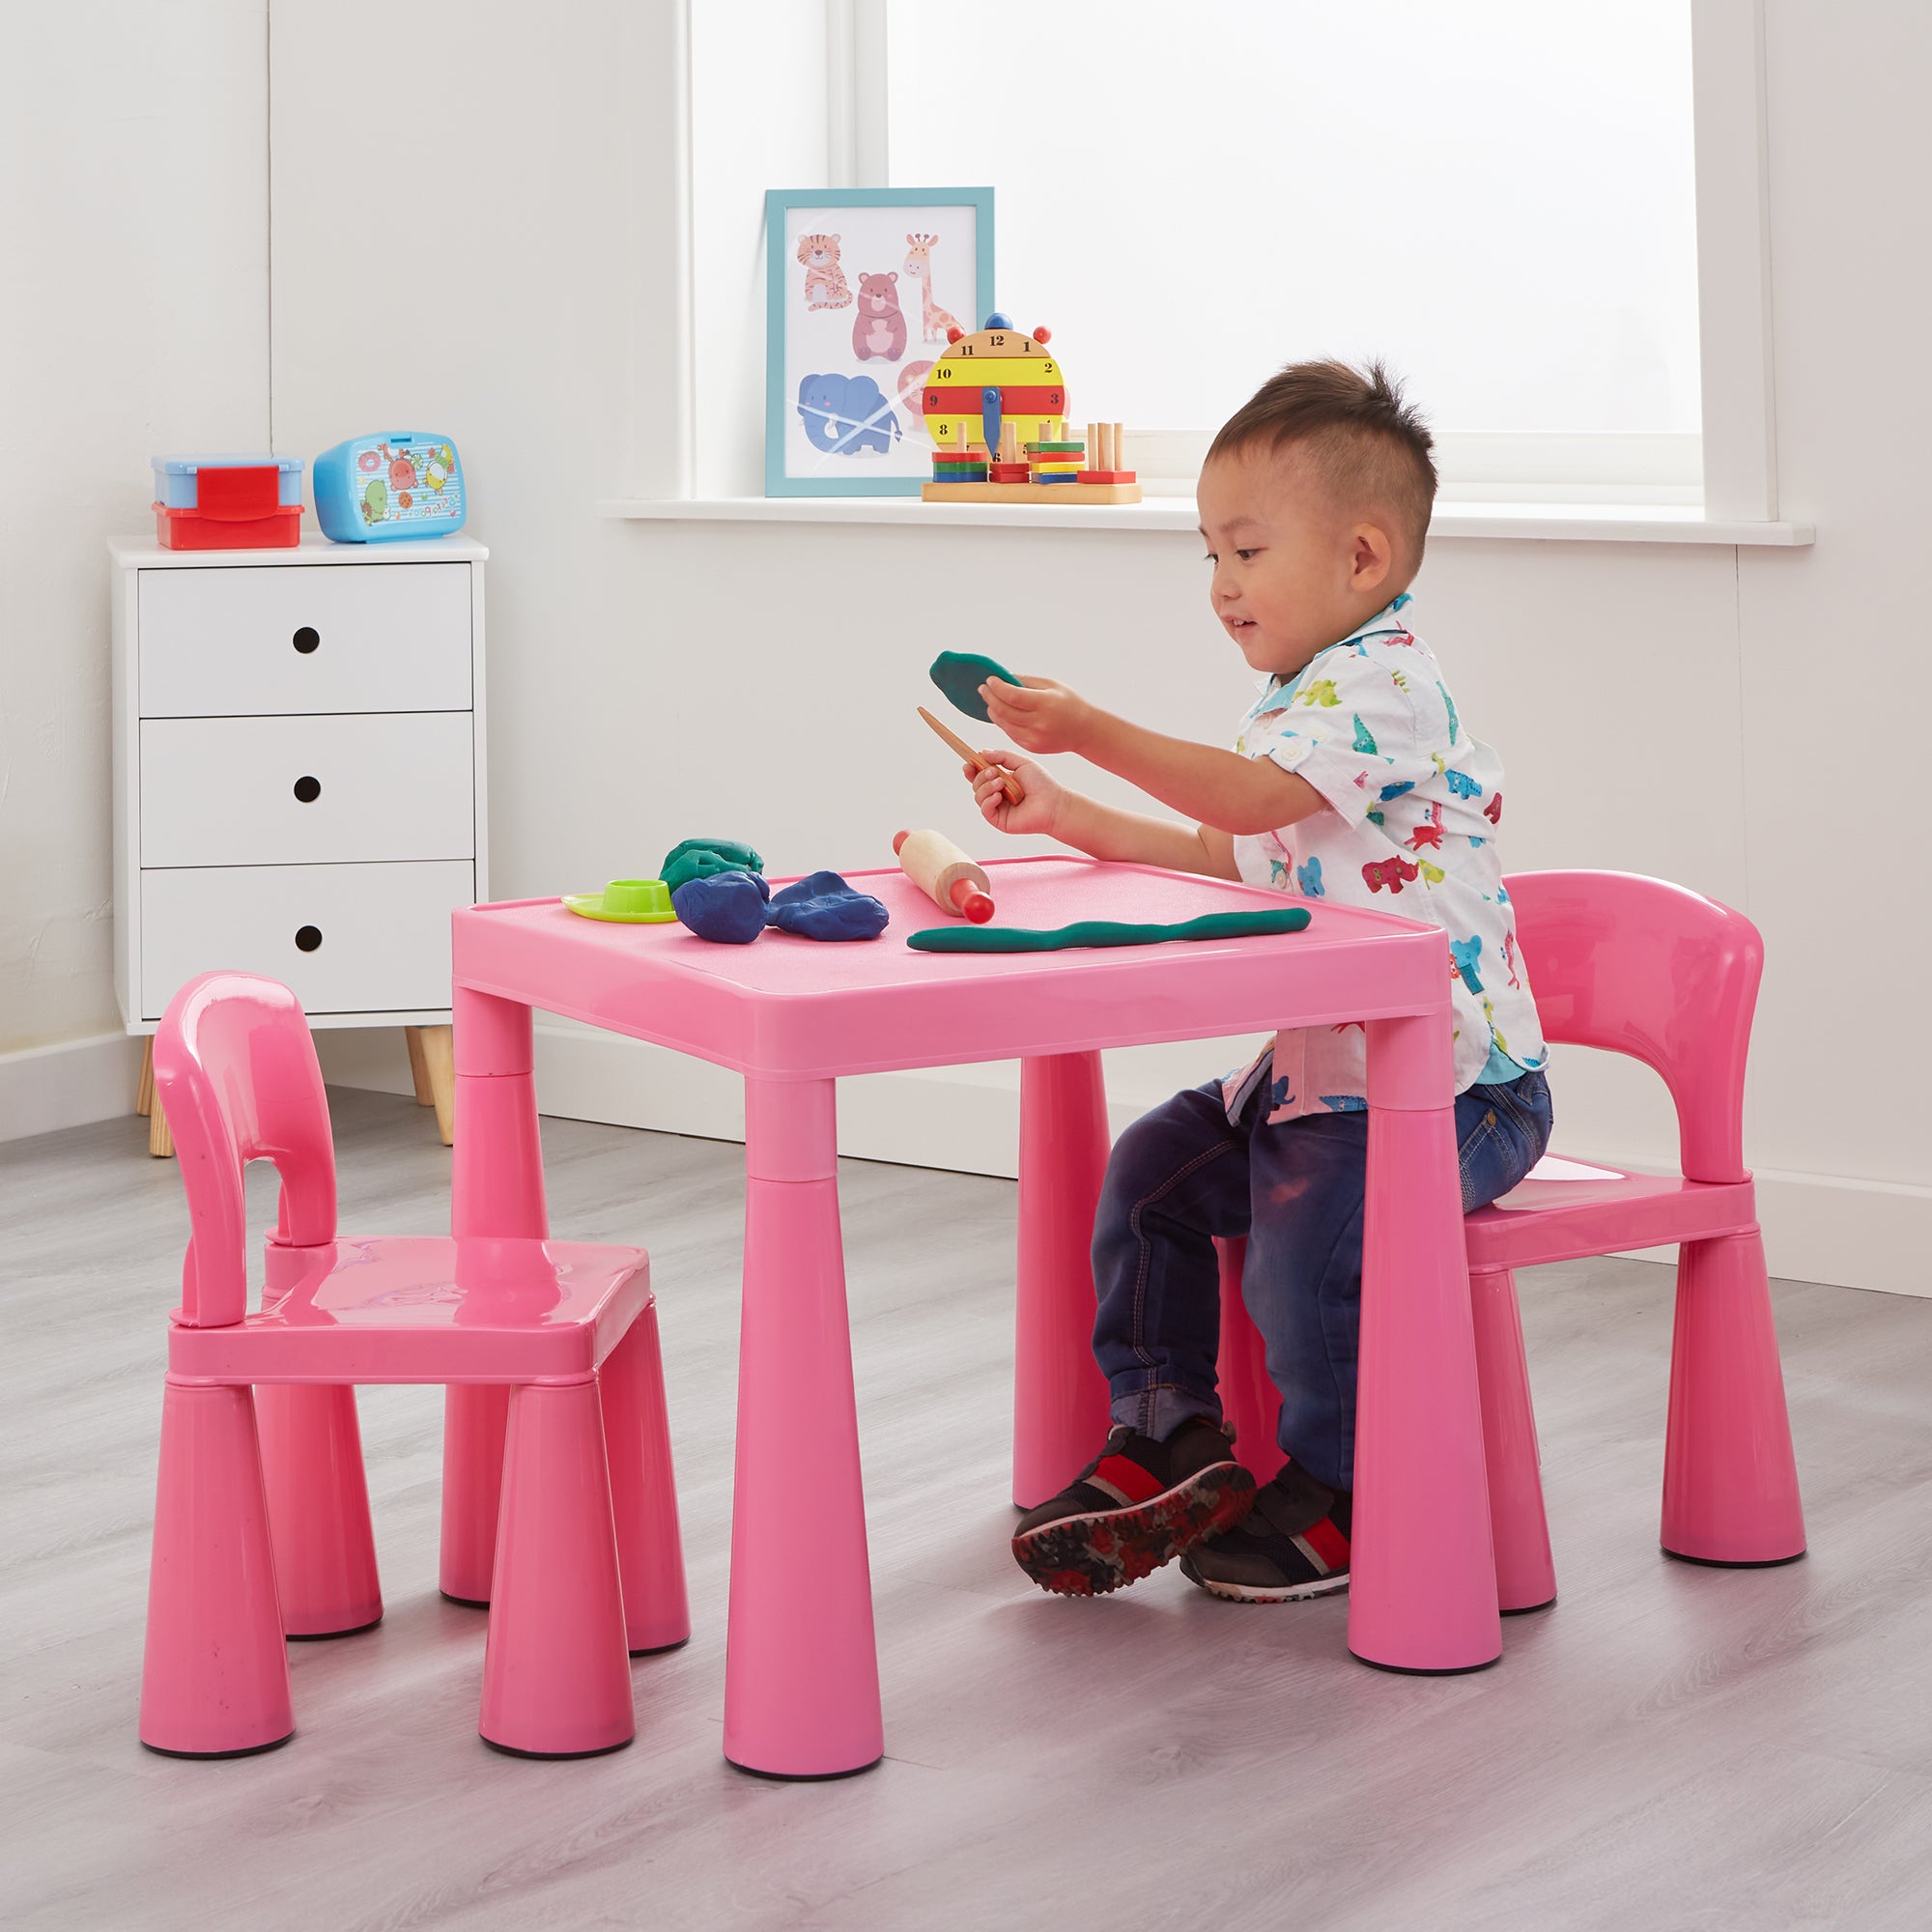 children's activity table and chair set